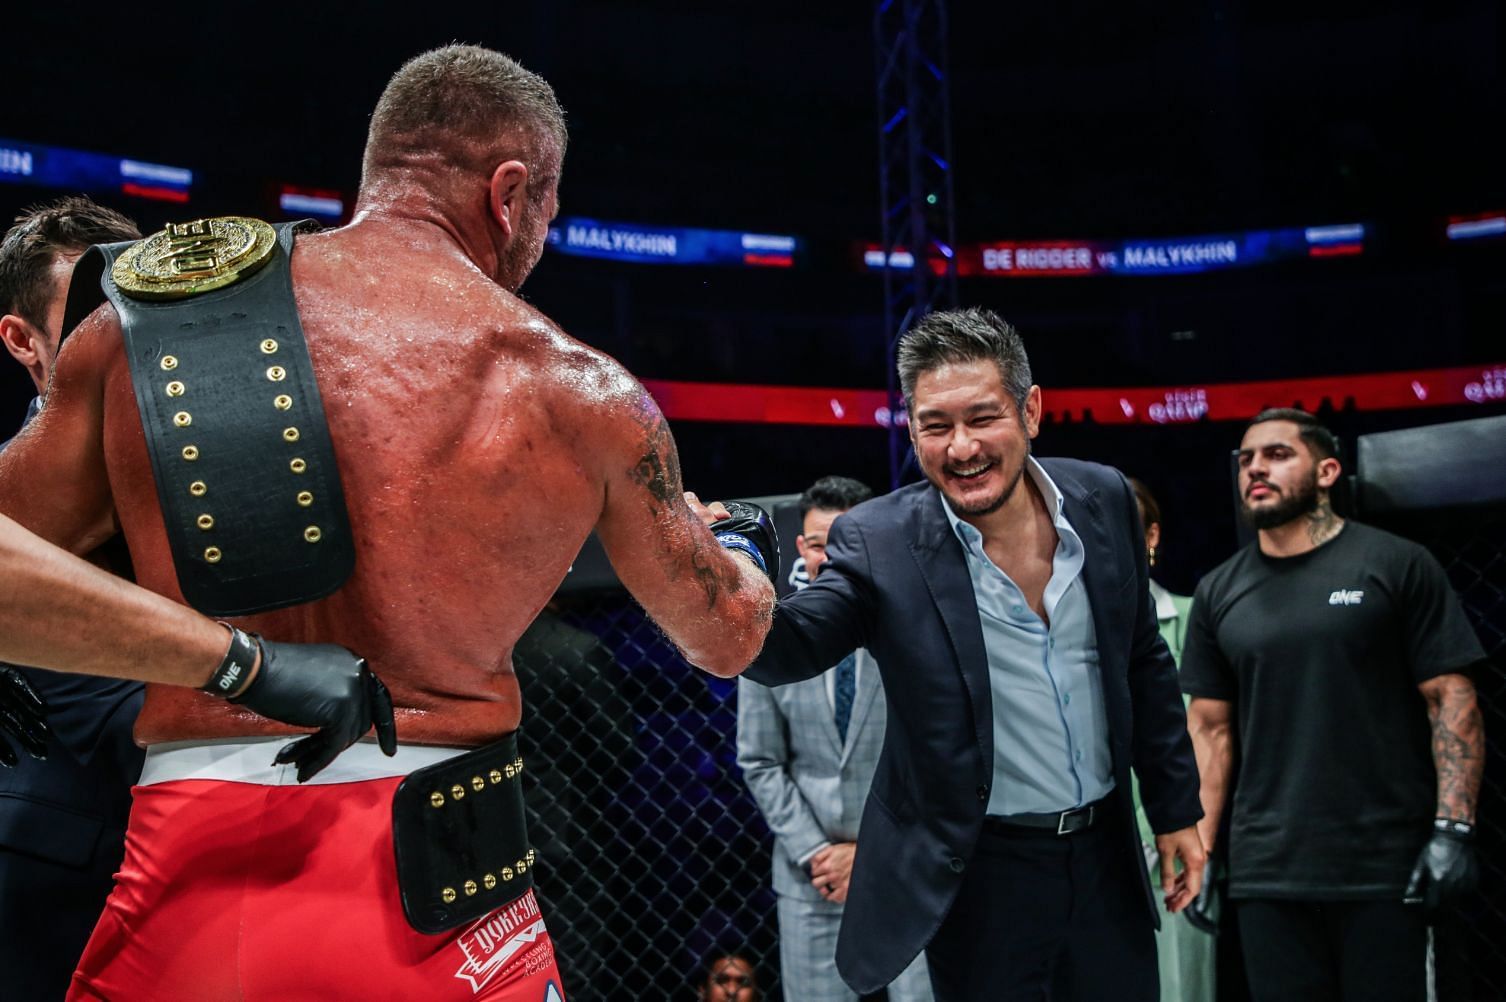 Anatoly Malykhin (L) and Chatri Sityodtong (R) | Image by ONE Championship